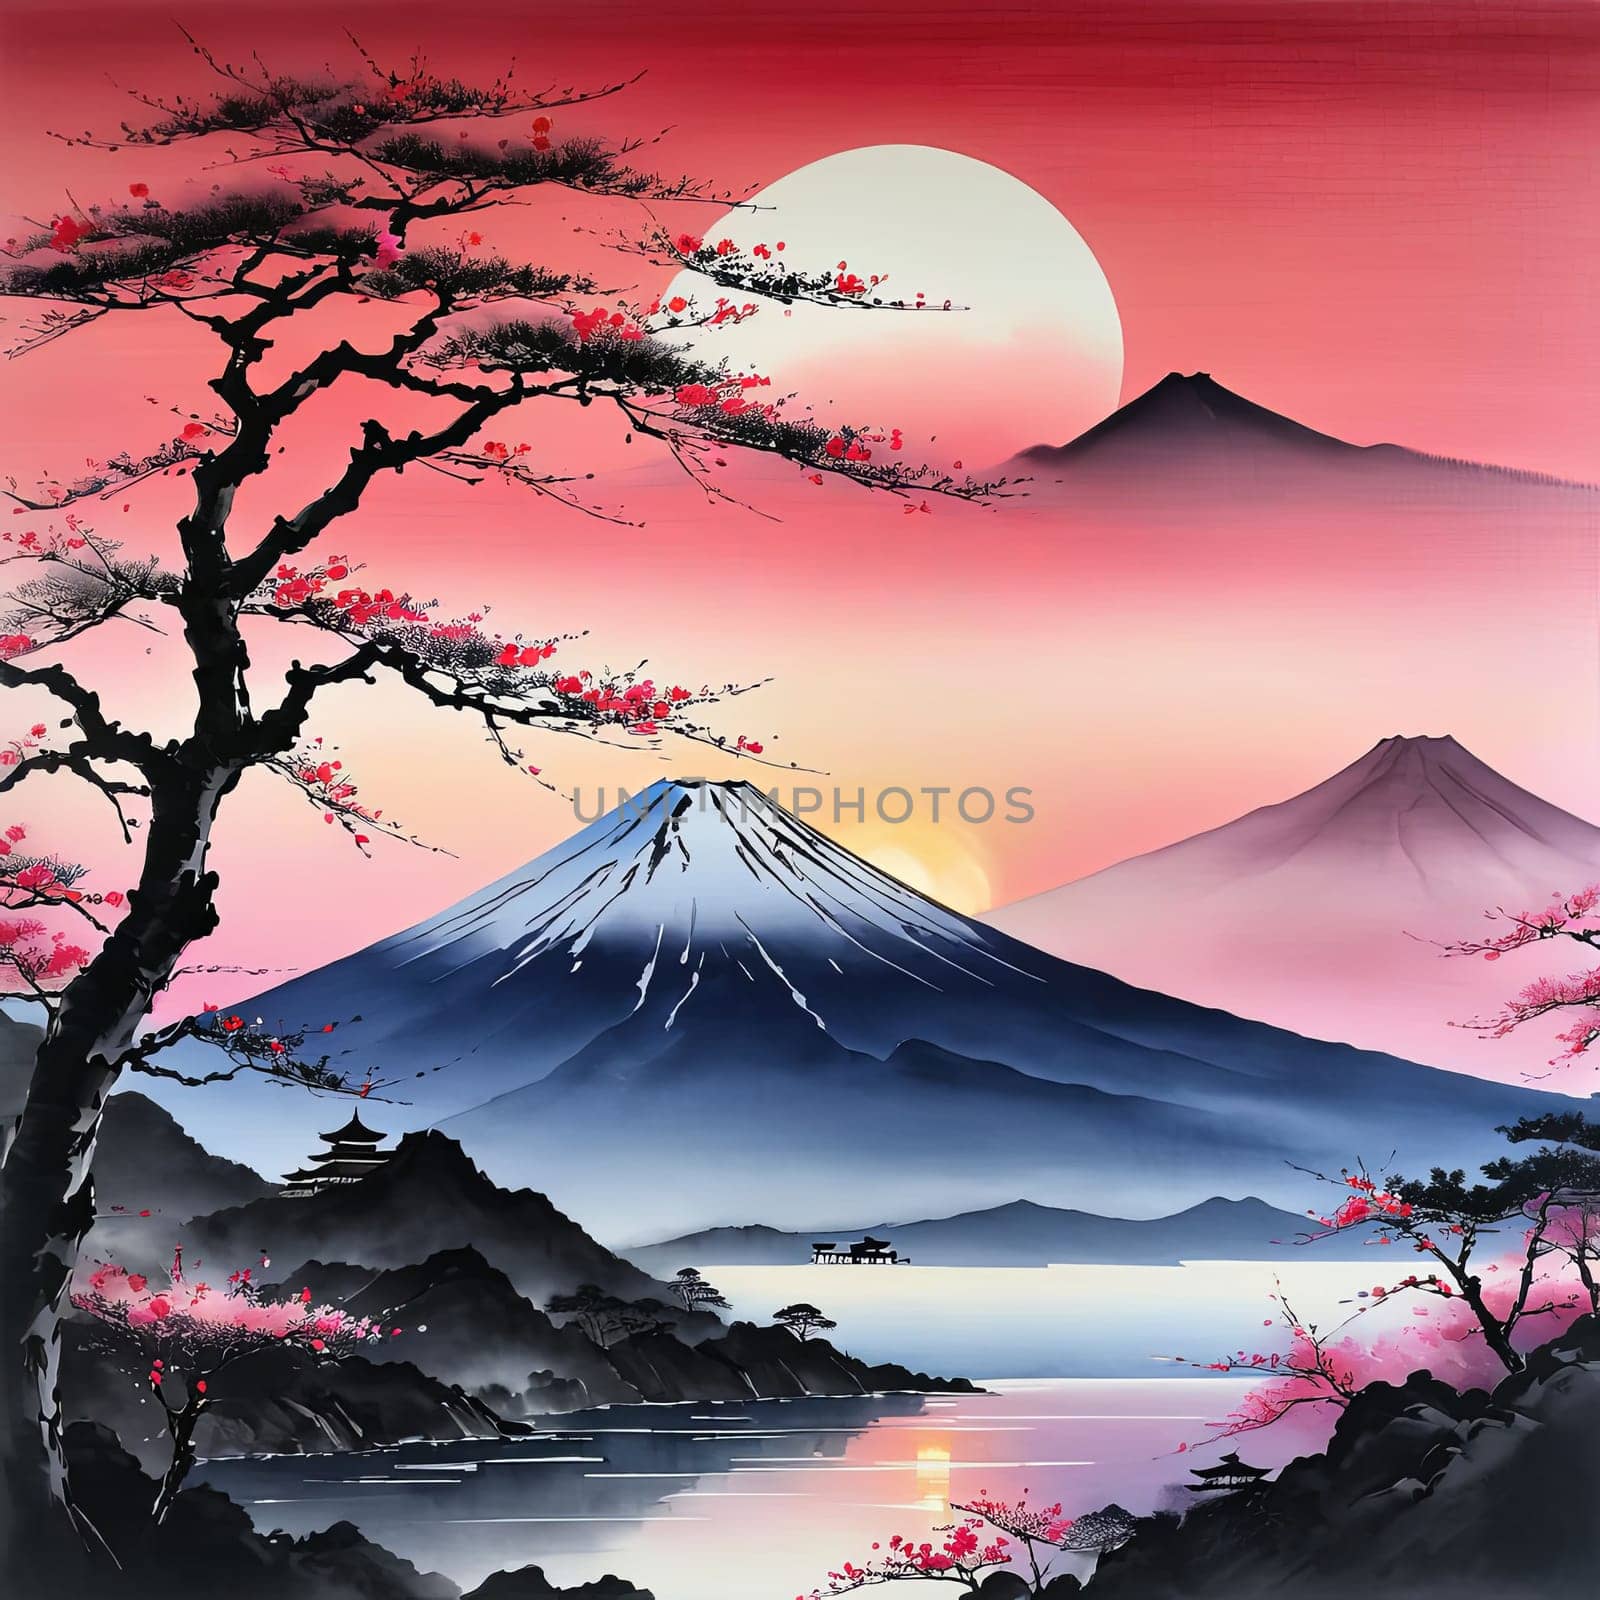 Mount Fuji majestically rising in background, framed by delicate cherry blossoms in full bloom, capturing essence of Japans natural beauty, cultural significance. For art, fashion, style, magazines